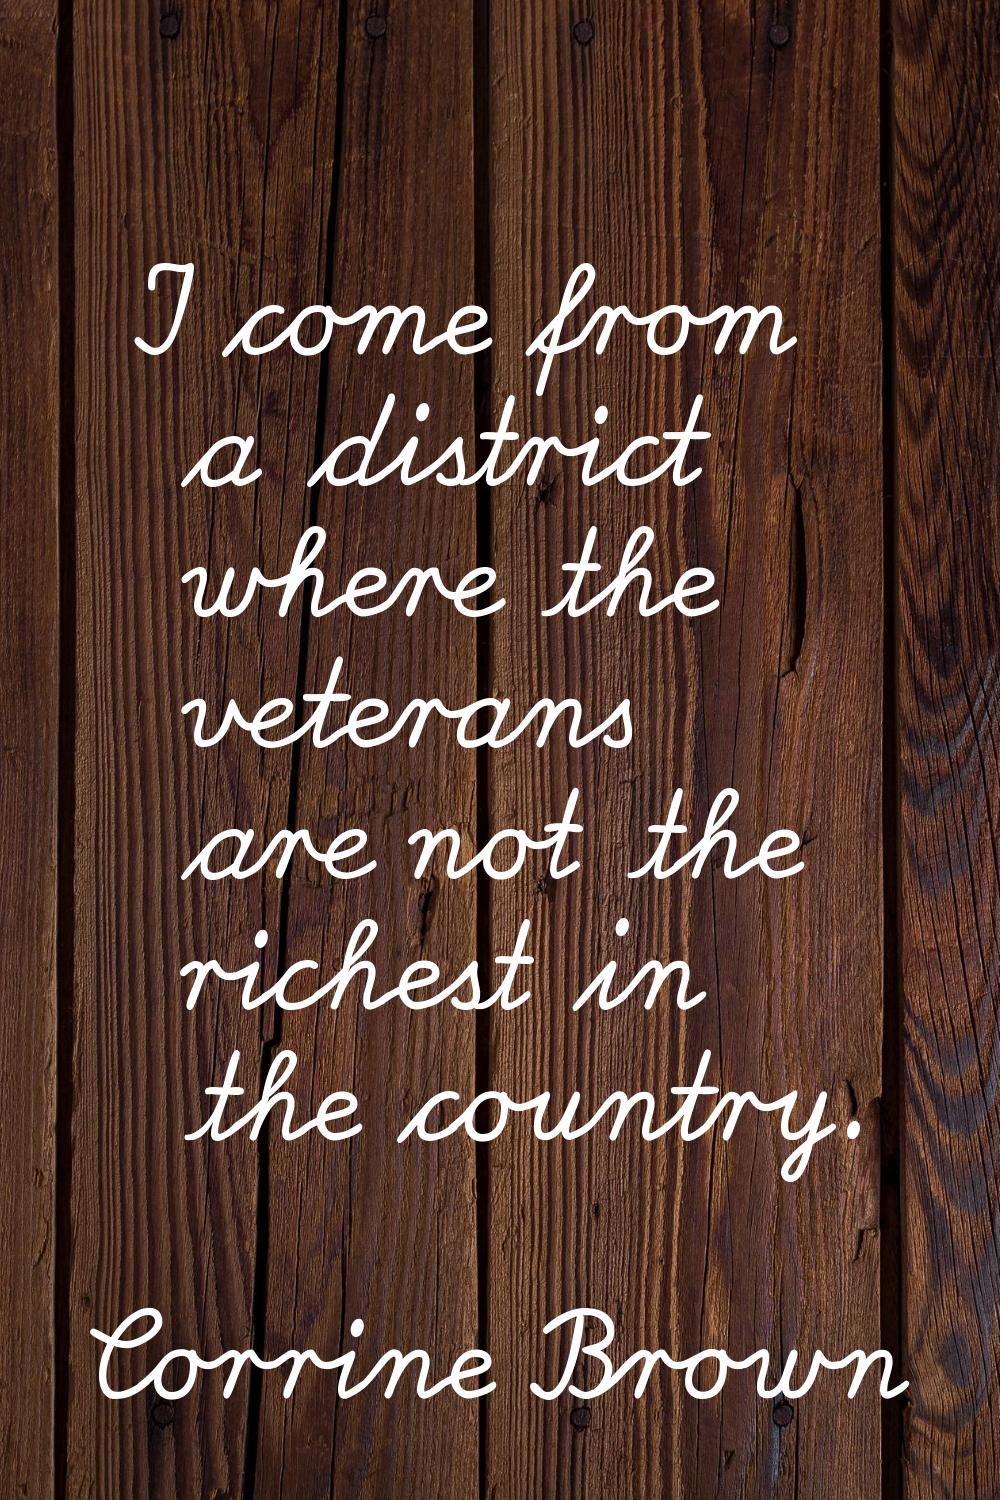 I come from a district where the veterans are not the richest in the country.